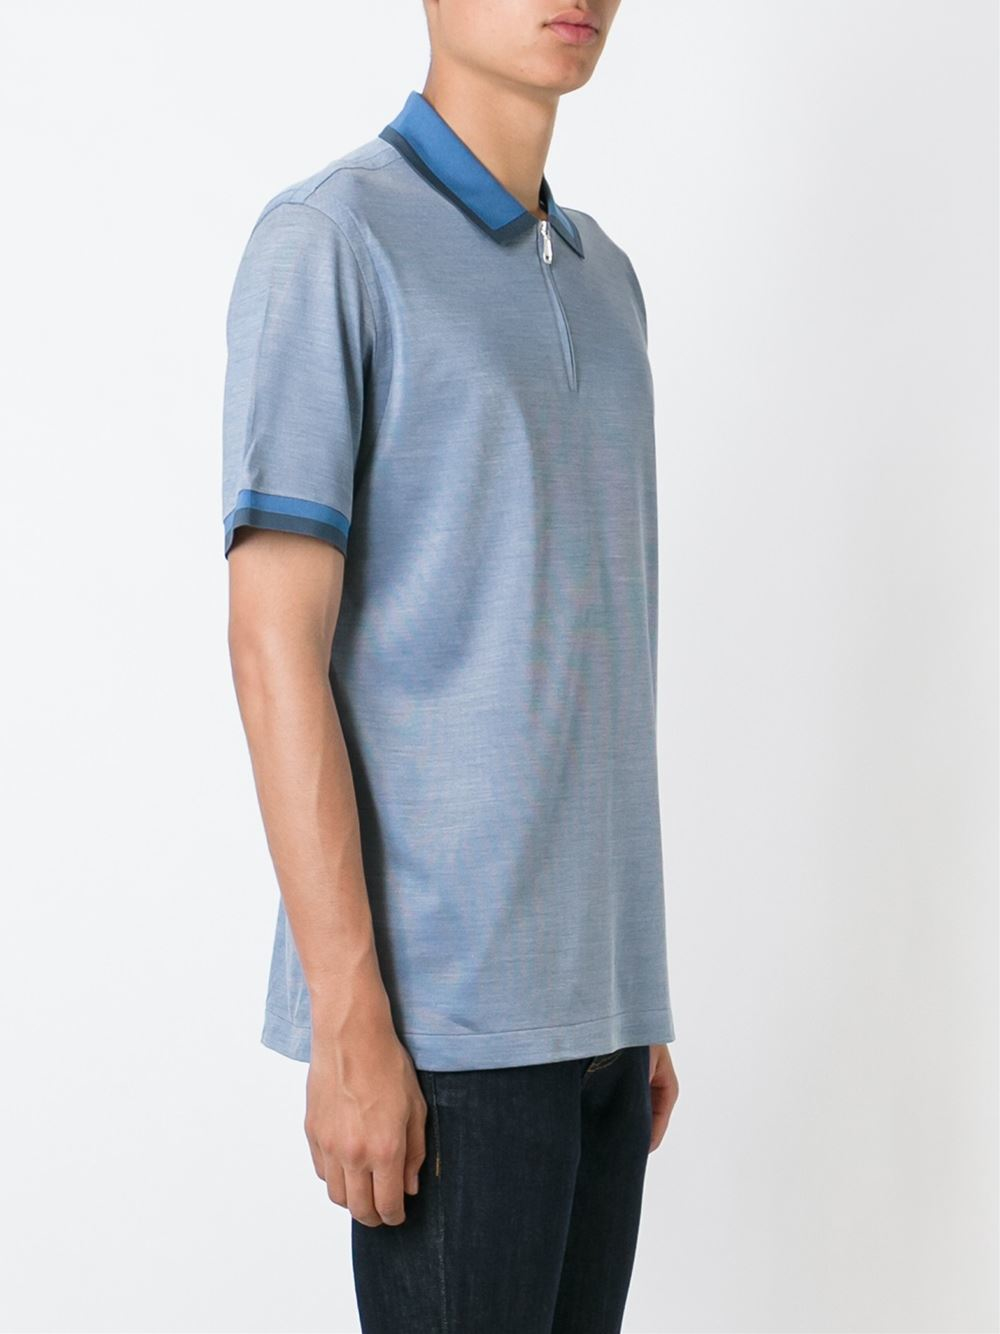 Lyst - Brioni Zip Collar Polo Shirt in Blue for Men